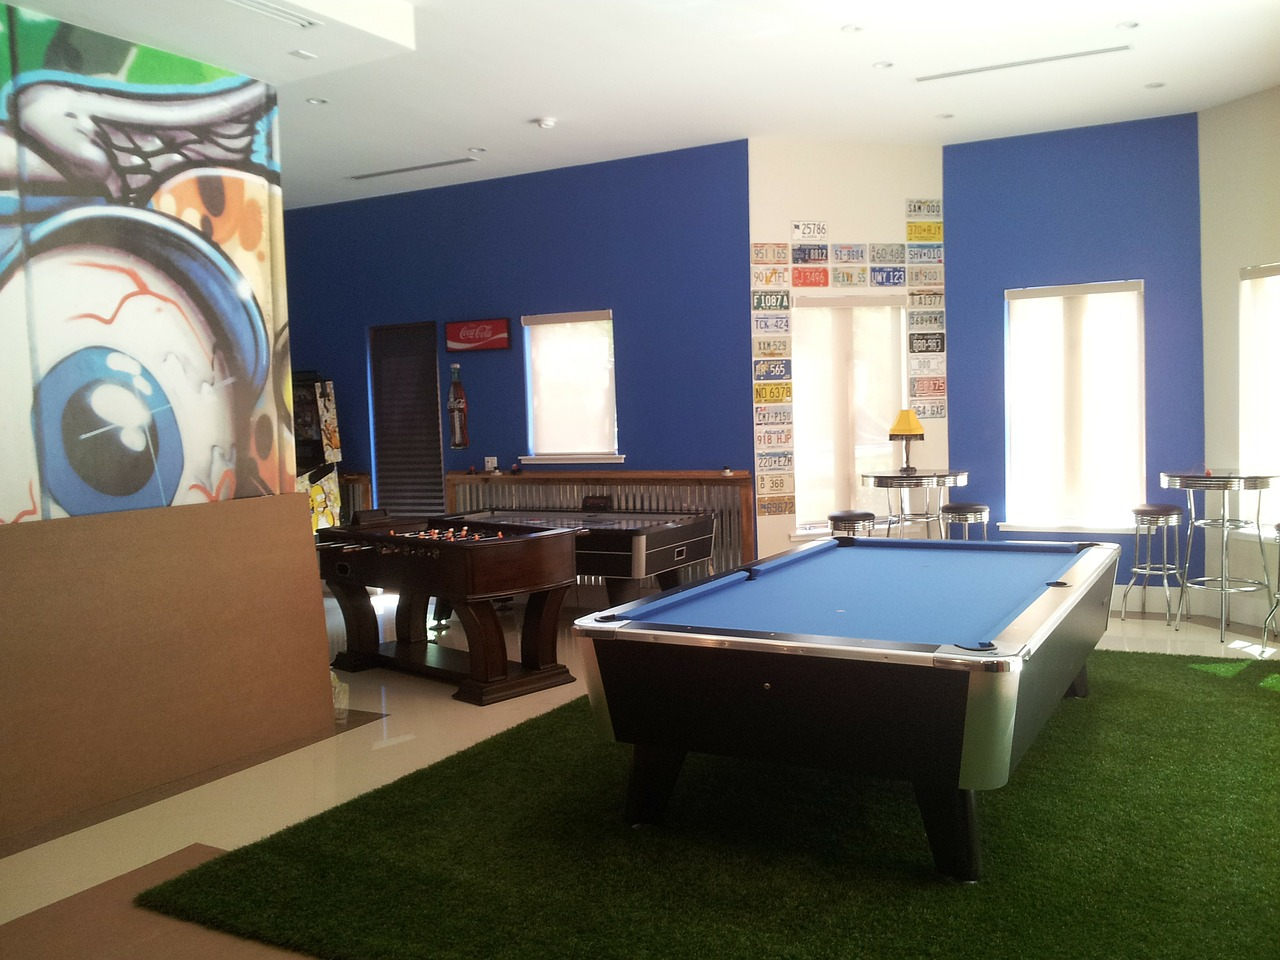 basement of house turned into game room with pool table and Foosball table